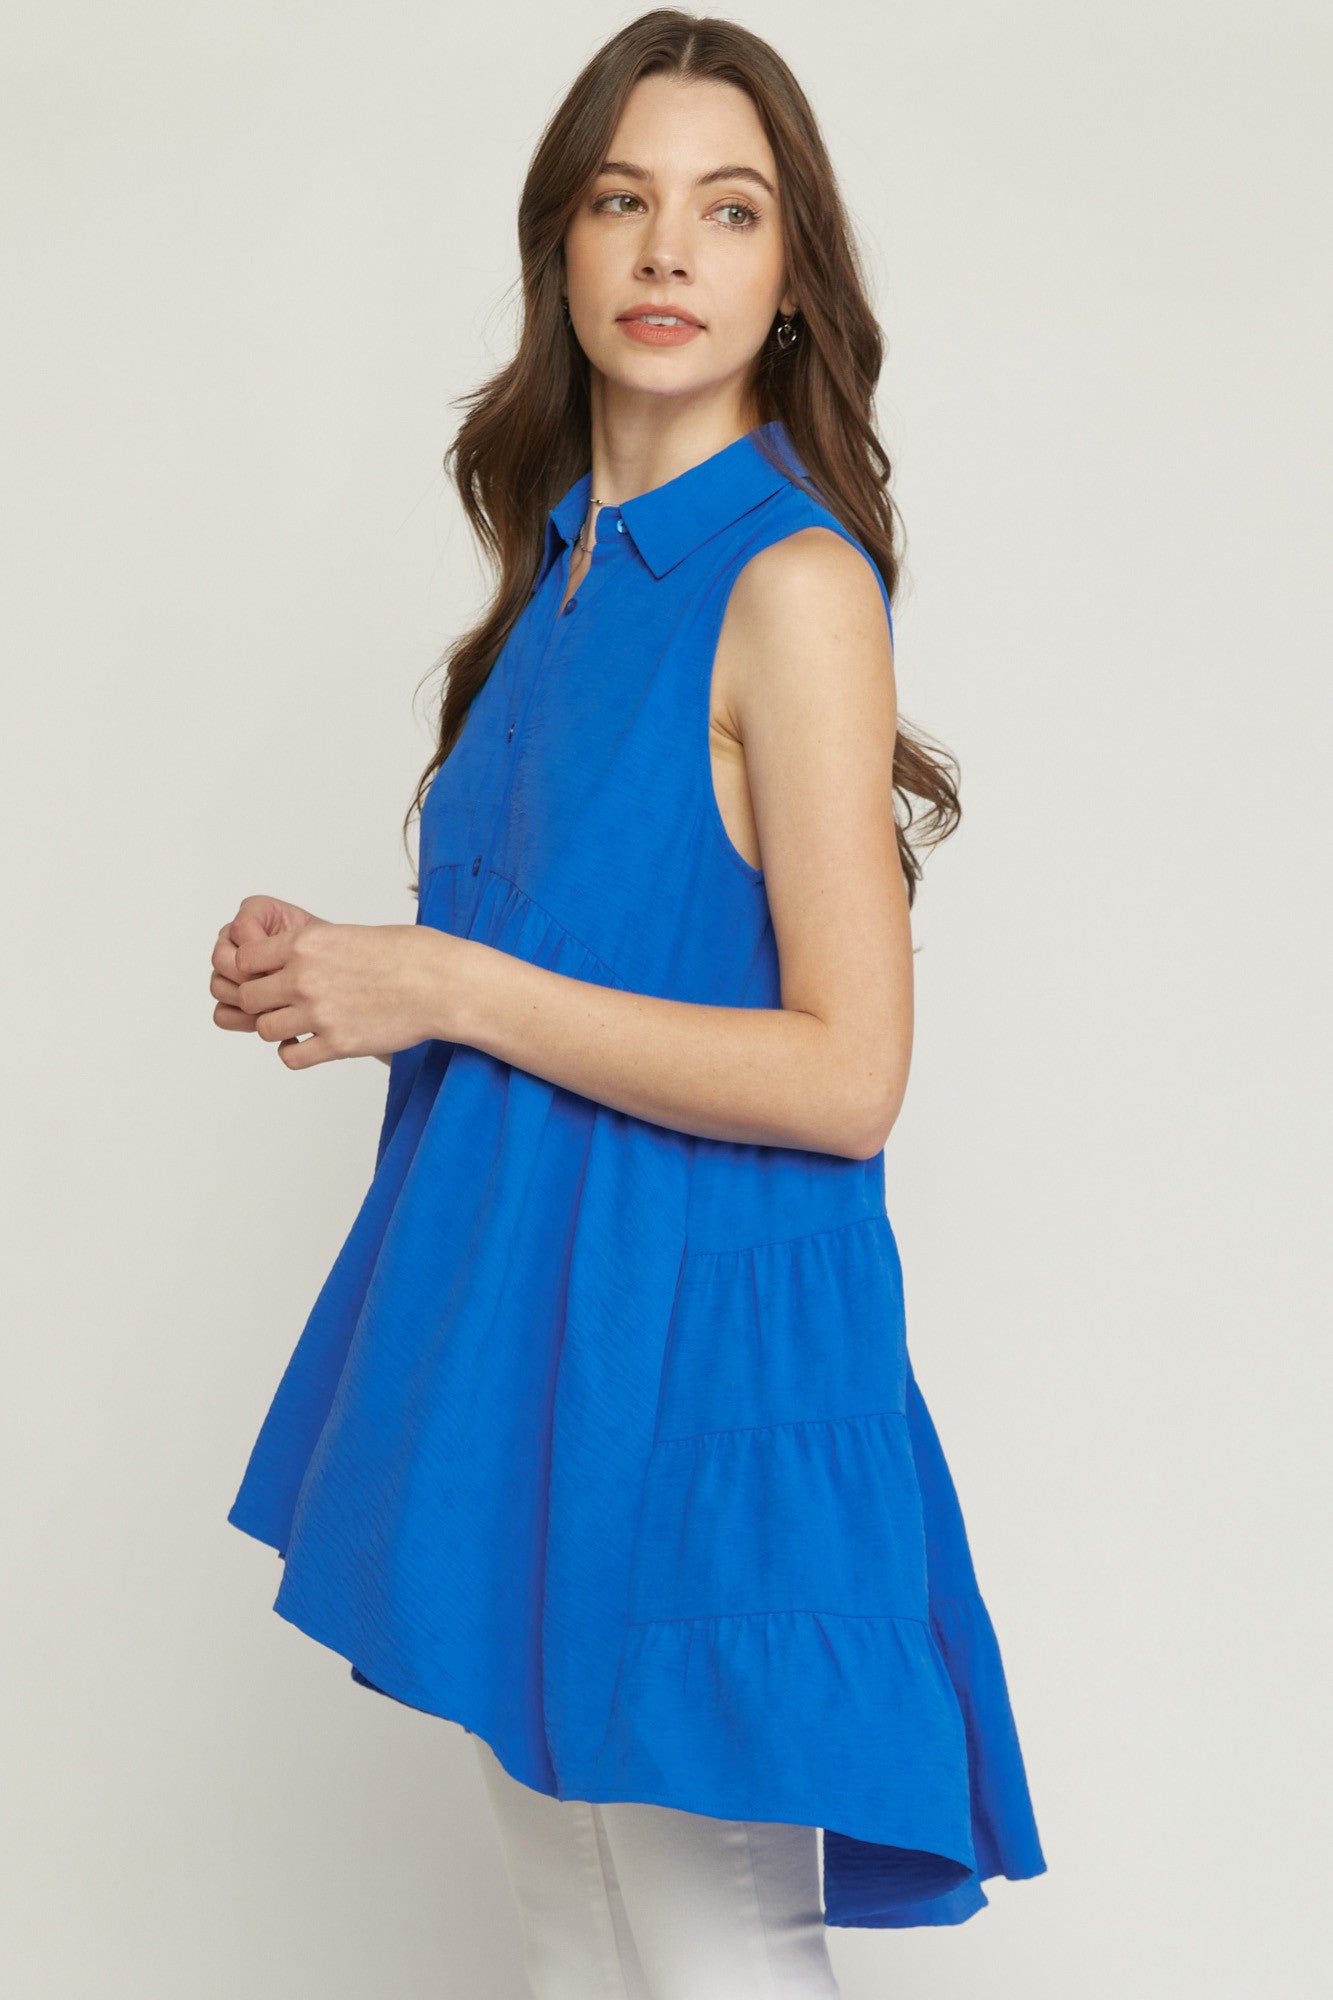 Colbalt Blue Collared Sleeveless Tiered Tunic Top